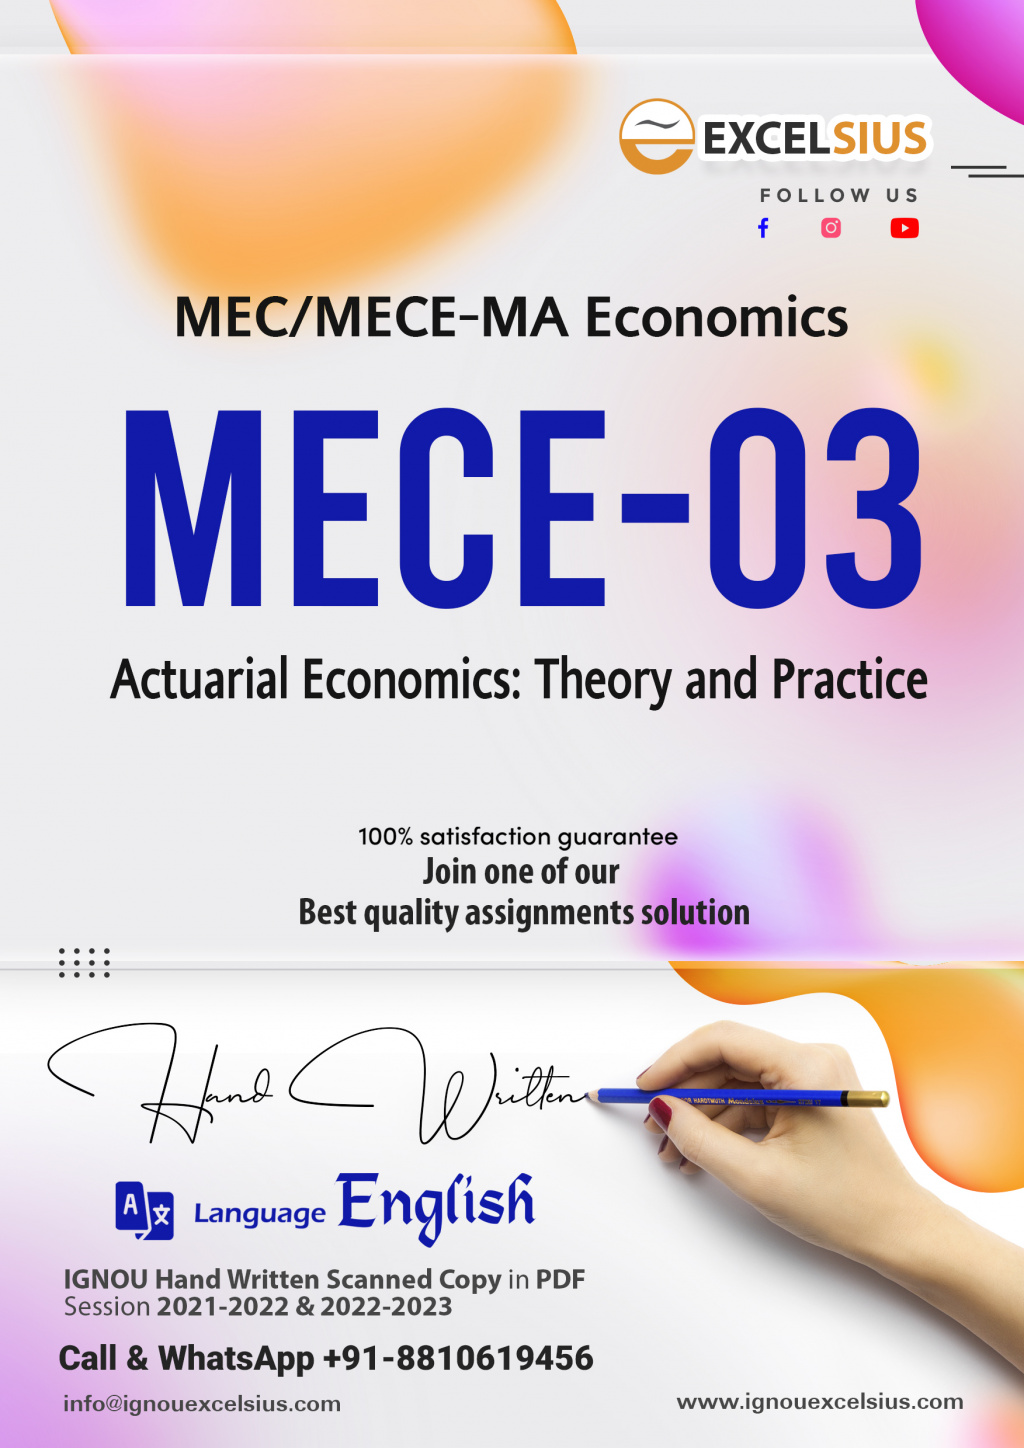 IGNOU MECE-03 - Actuarial Economics: Theory and Practice Latest Solved Assignment-July 2022 – January 2023